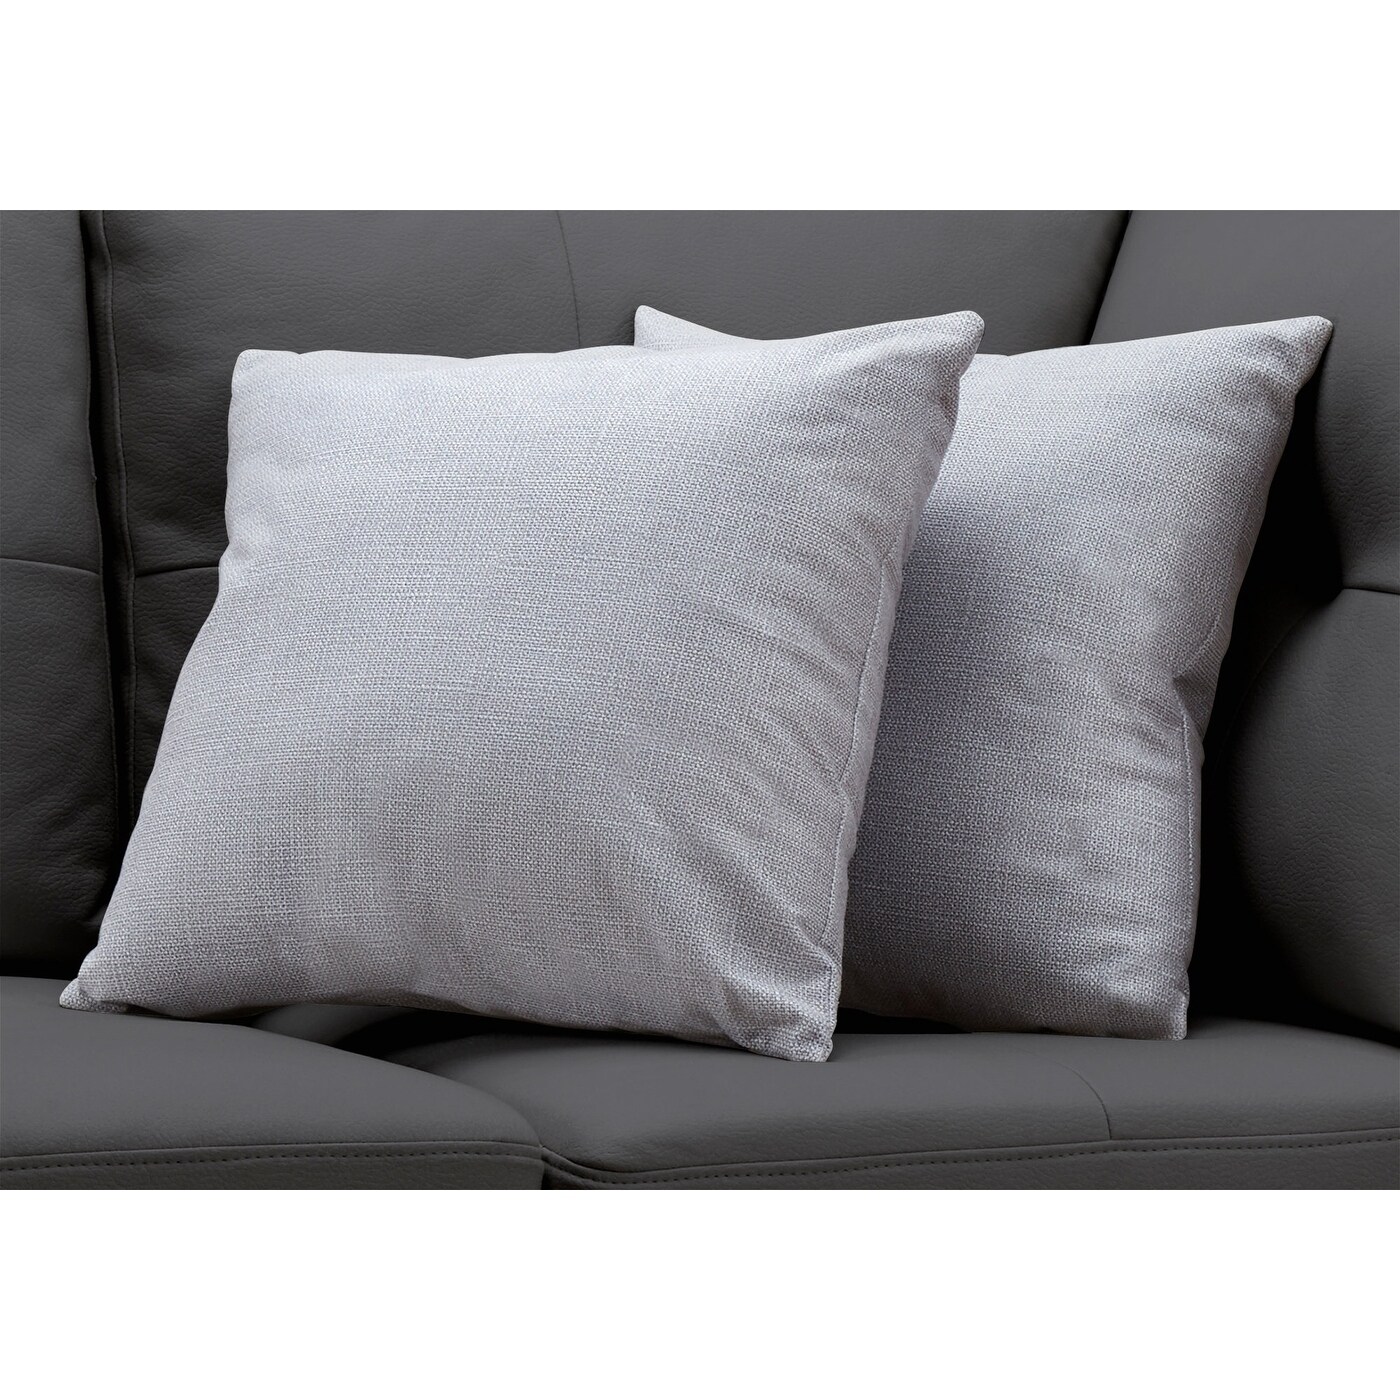 Pillows, Set Of 2, 18 X 18 Square, Insert Included, Decorative Throw,  Accent, Sofa, Couch, Bedroom - On Sale - Bed Bath & Beyond - 18227444